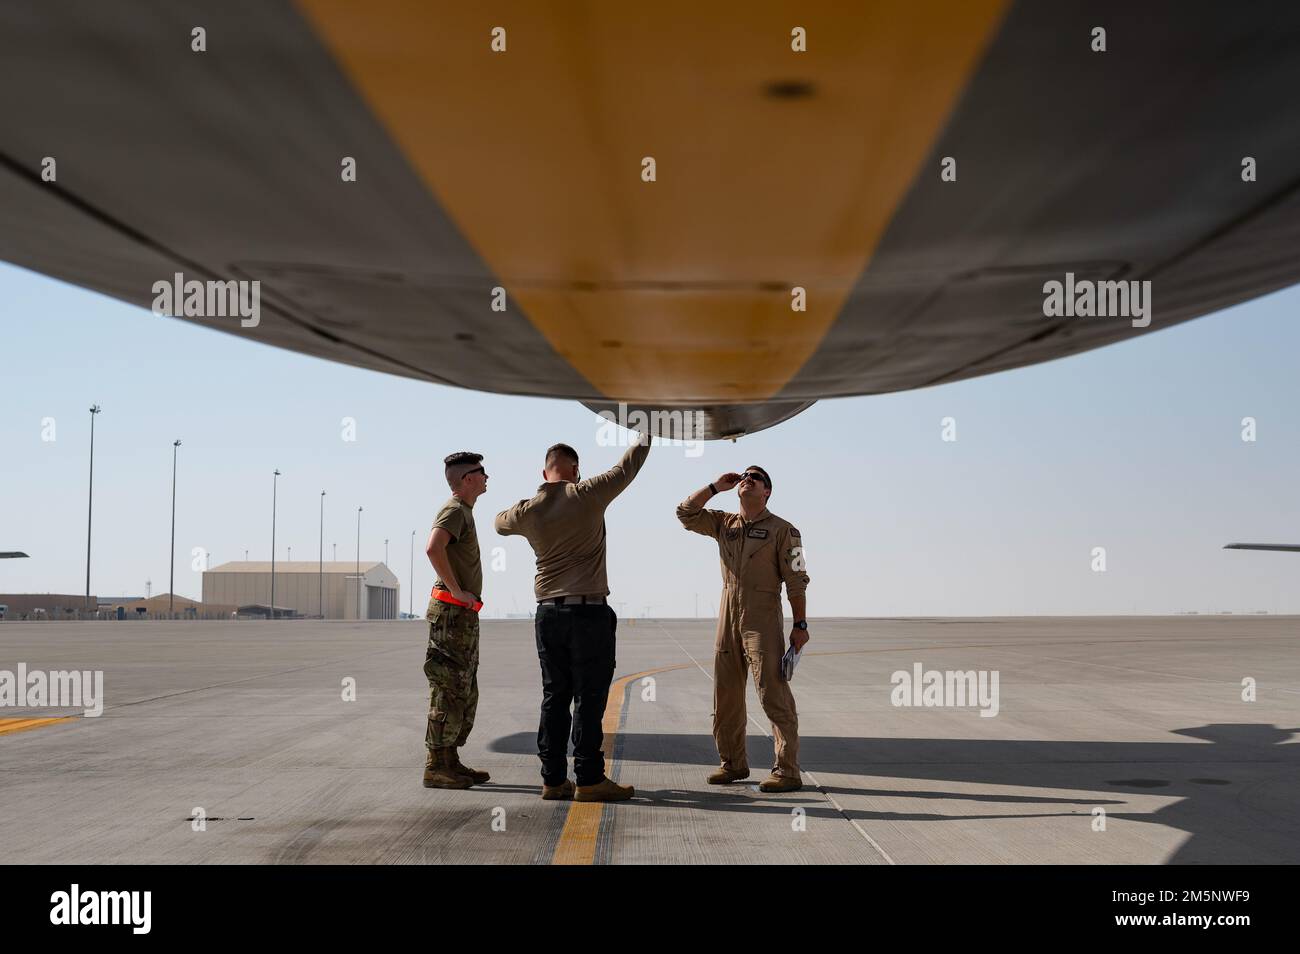 U.S. Air Force Airmen conduct preflight inspections on a U.S. Air Force KC-135 Stratotanker assigned to the 28th Expeditionary Air Refueling Squadron at Al Udeid Air Base, Qatar, Feb. 26, 2022. The 28th EARS, deployed with U.S. Air Forces Central Command, is responsible for delivering fuel to U.S. and coalition forces, enabling war-winning air power, deterrence and stability to the region. Stock Photo